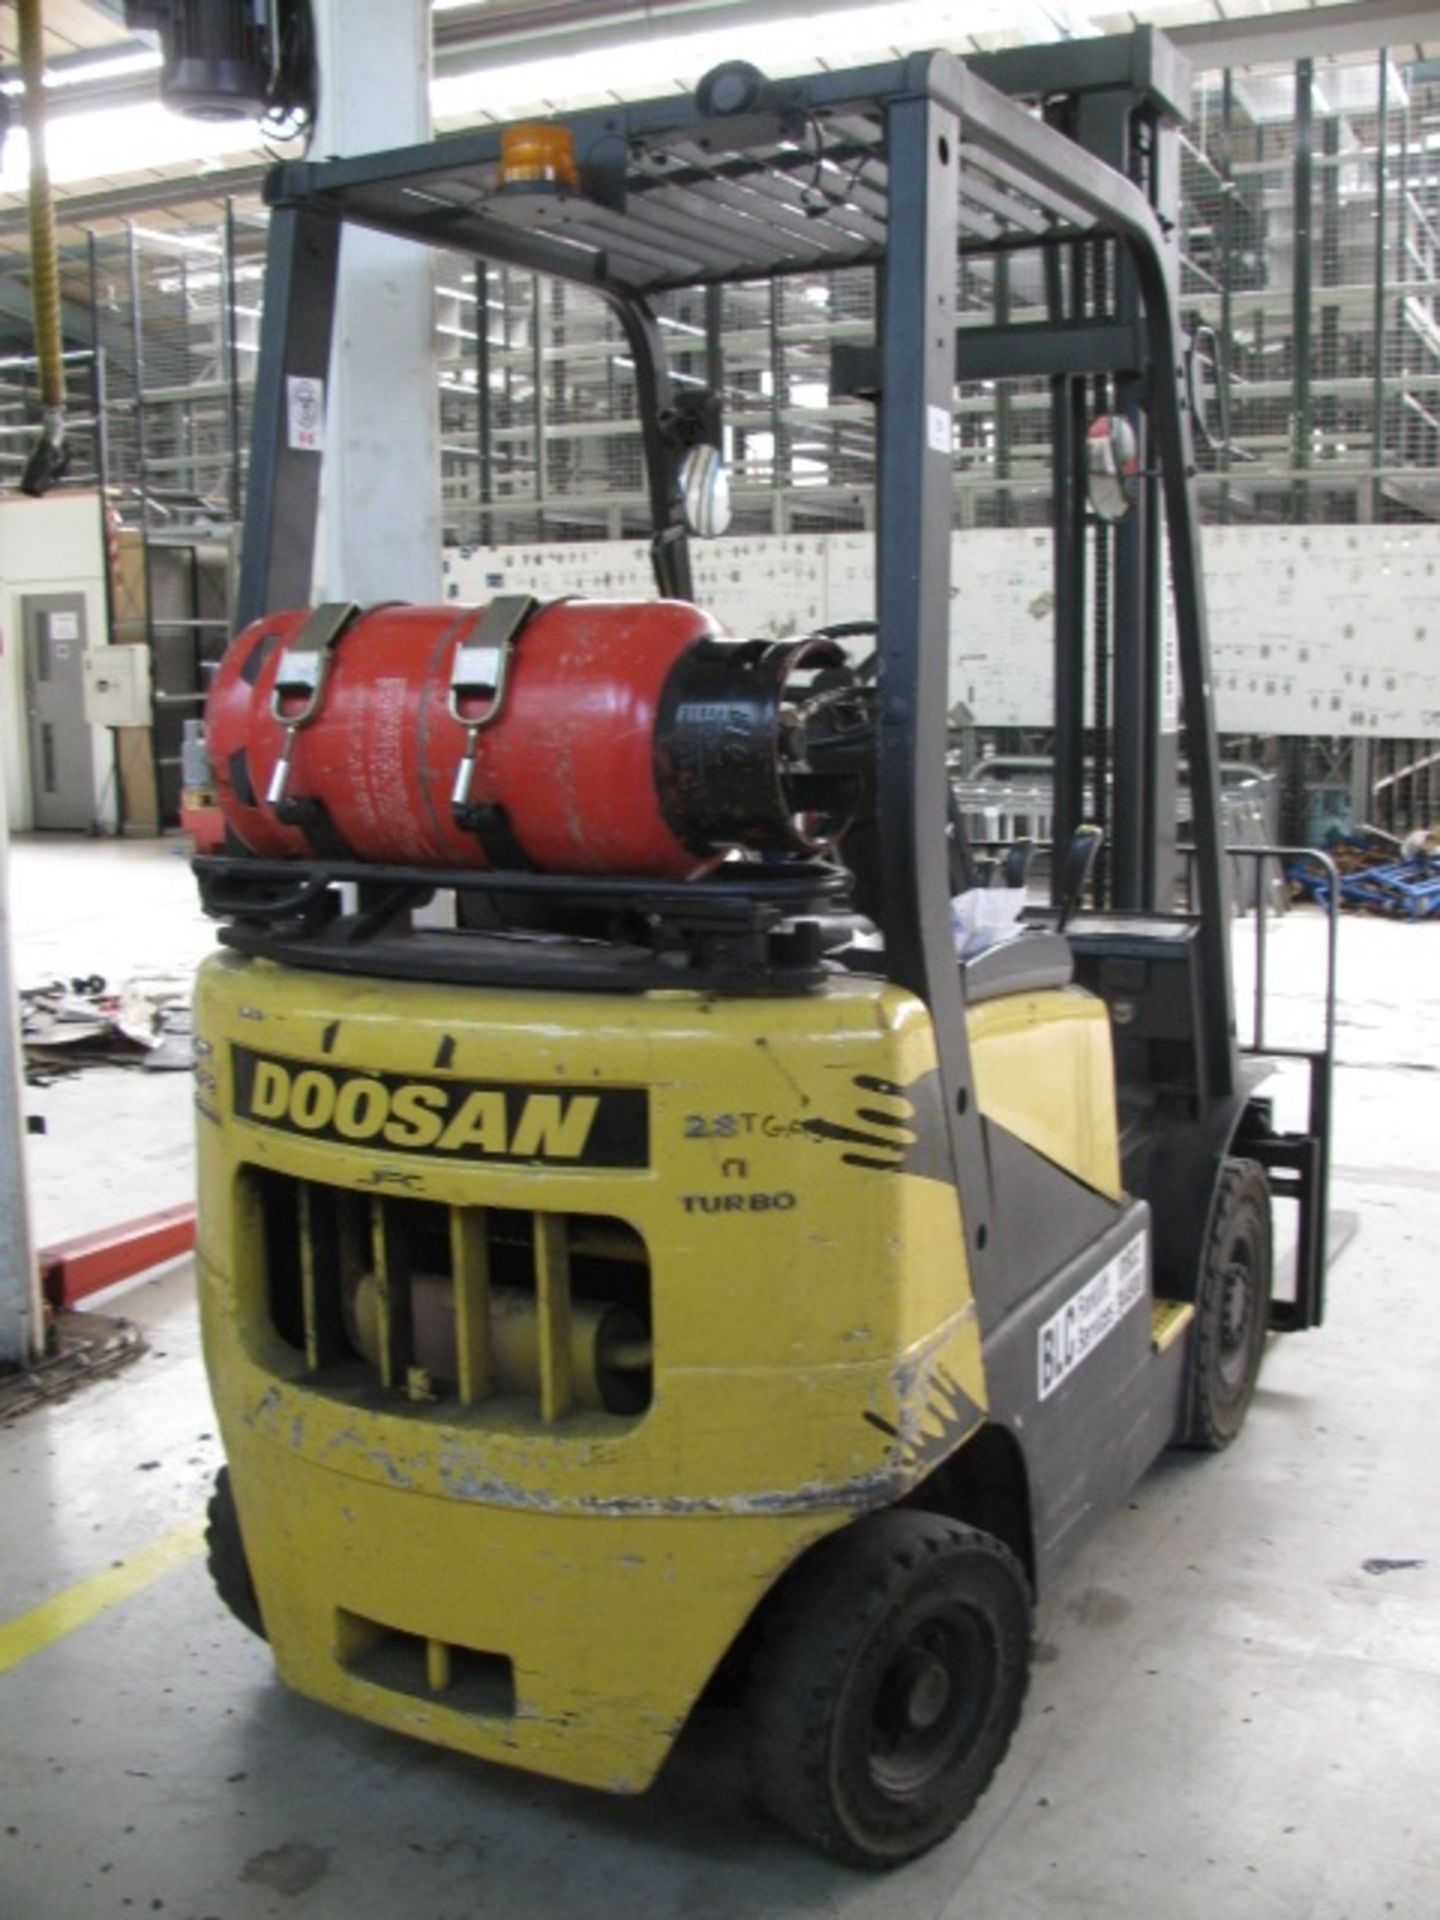 Doosan G15S-2 gas operated ride on fork lift truck - Image 2 of 6